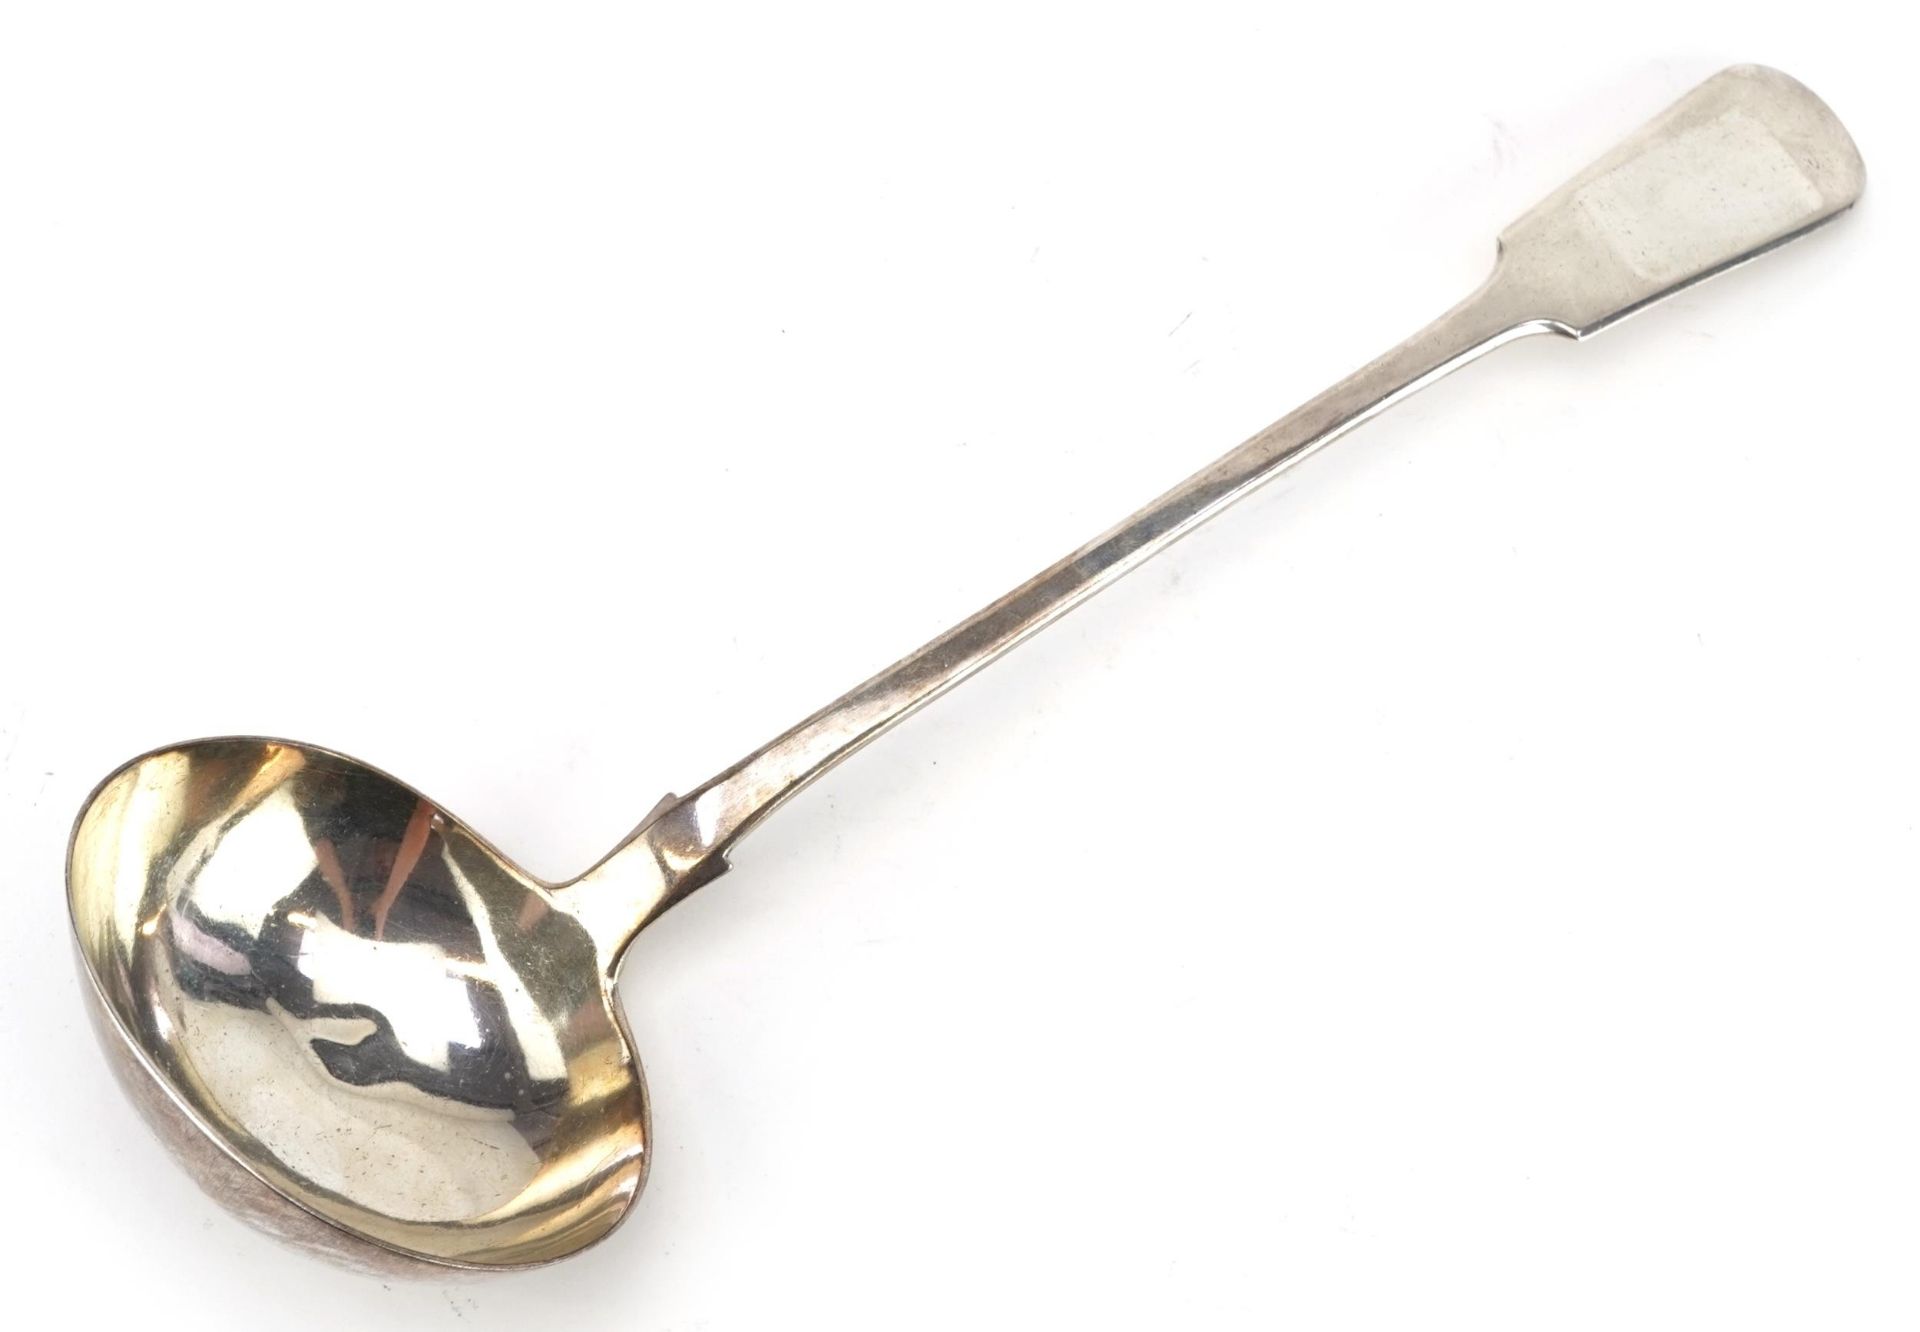 Charles Lias, 19th century silver ladle, London 1837, 35cm in length, 242.0g : For further